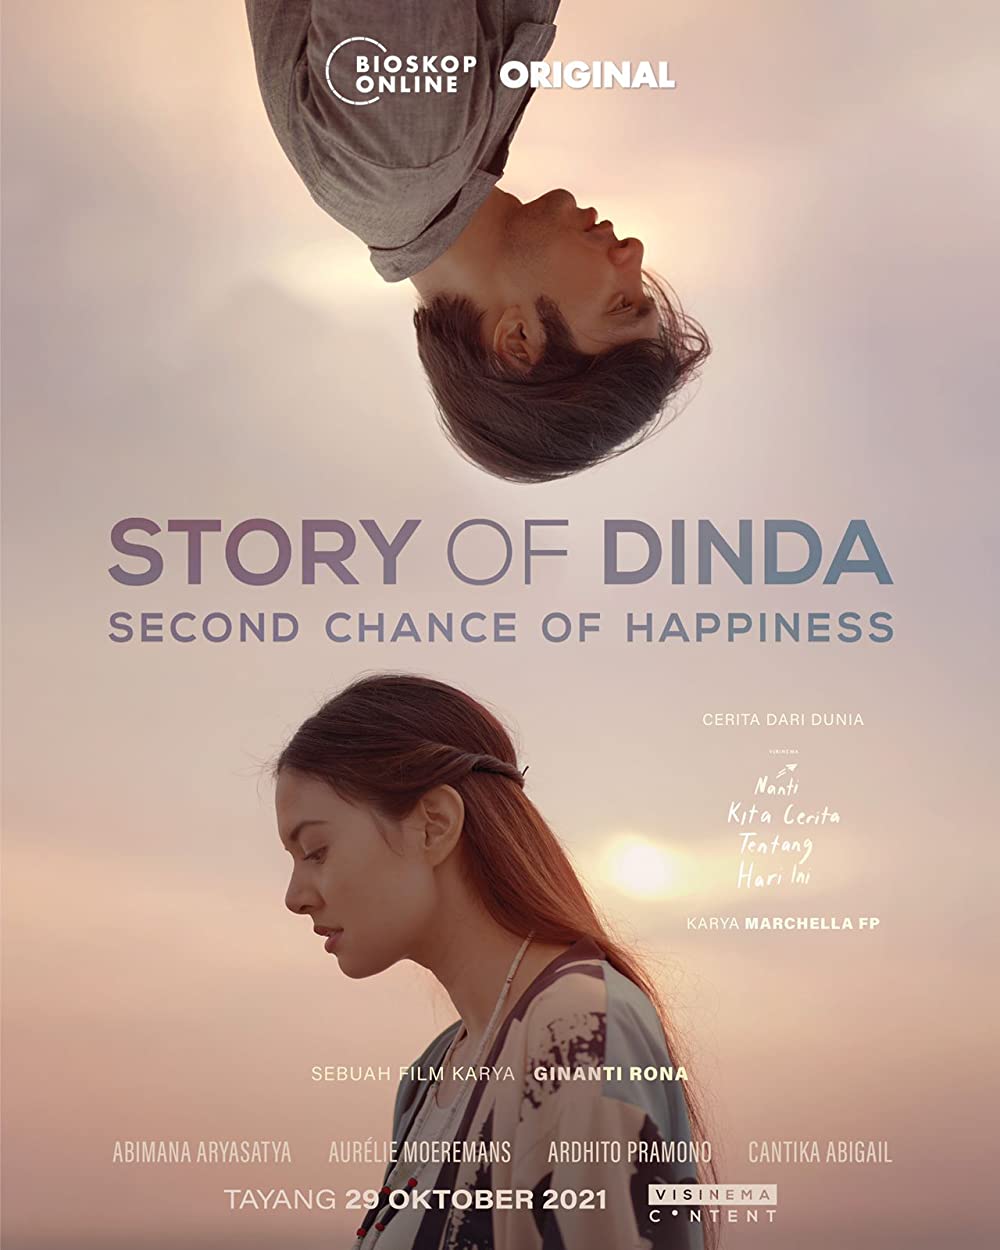     Story of Dinda: The Second Chance of Happiness